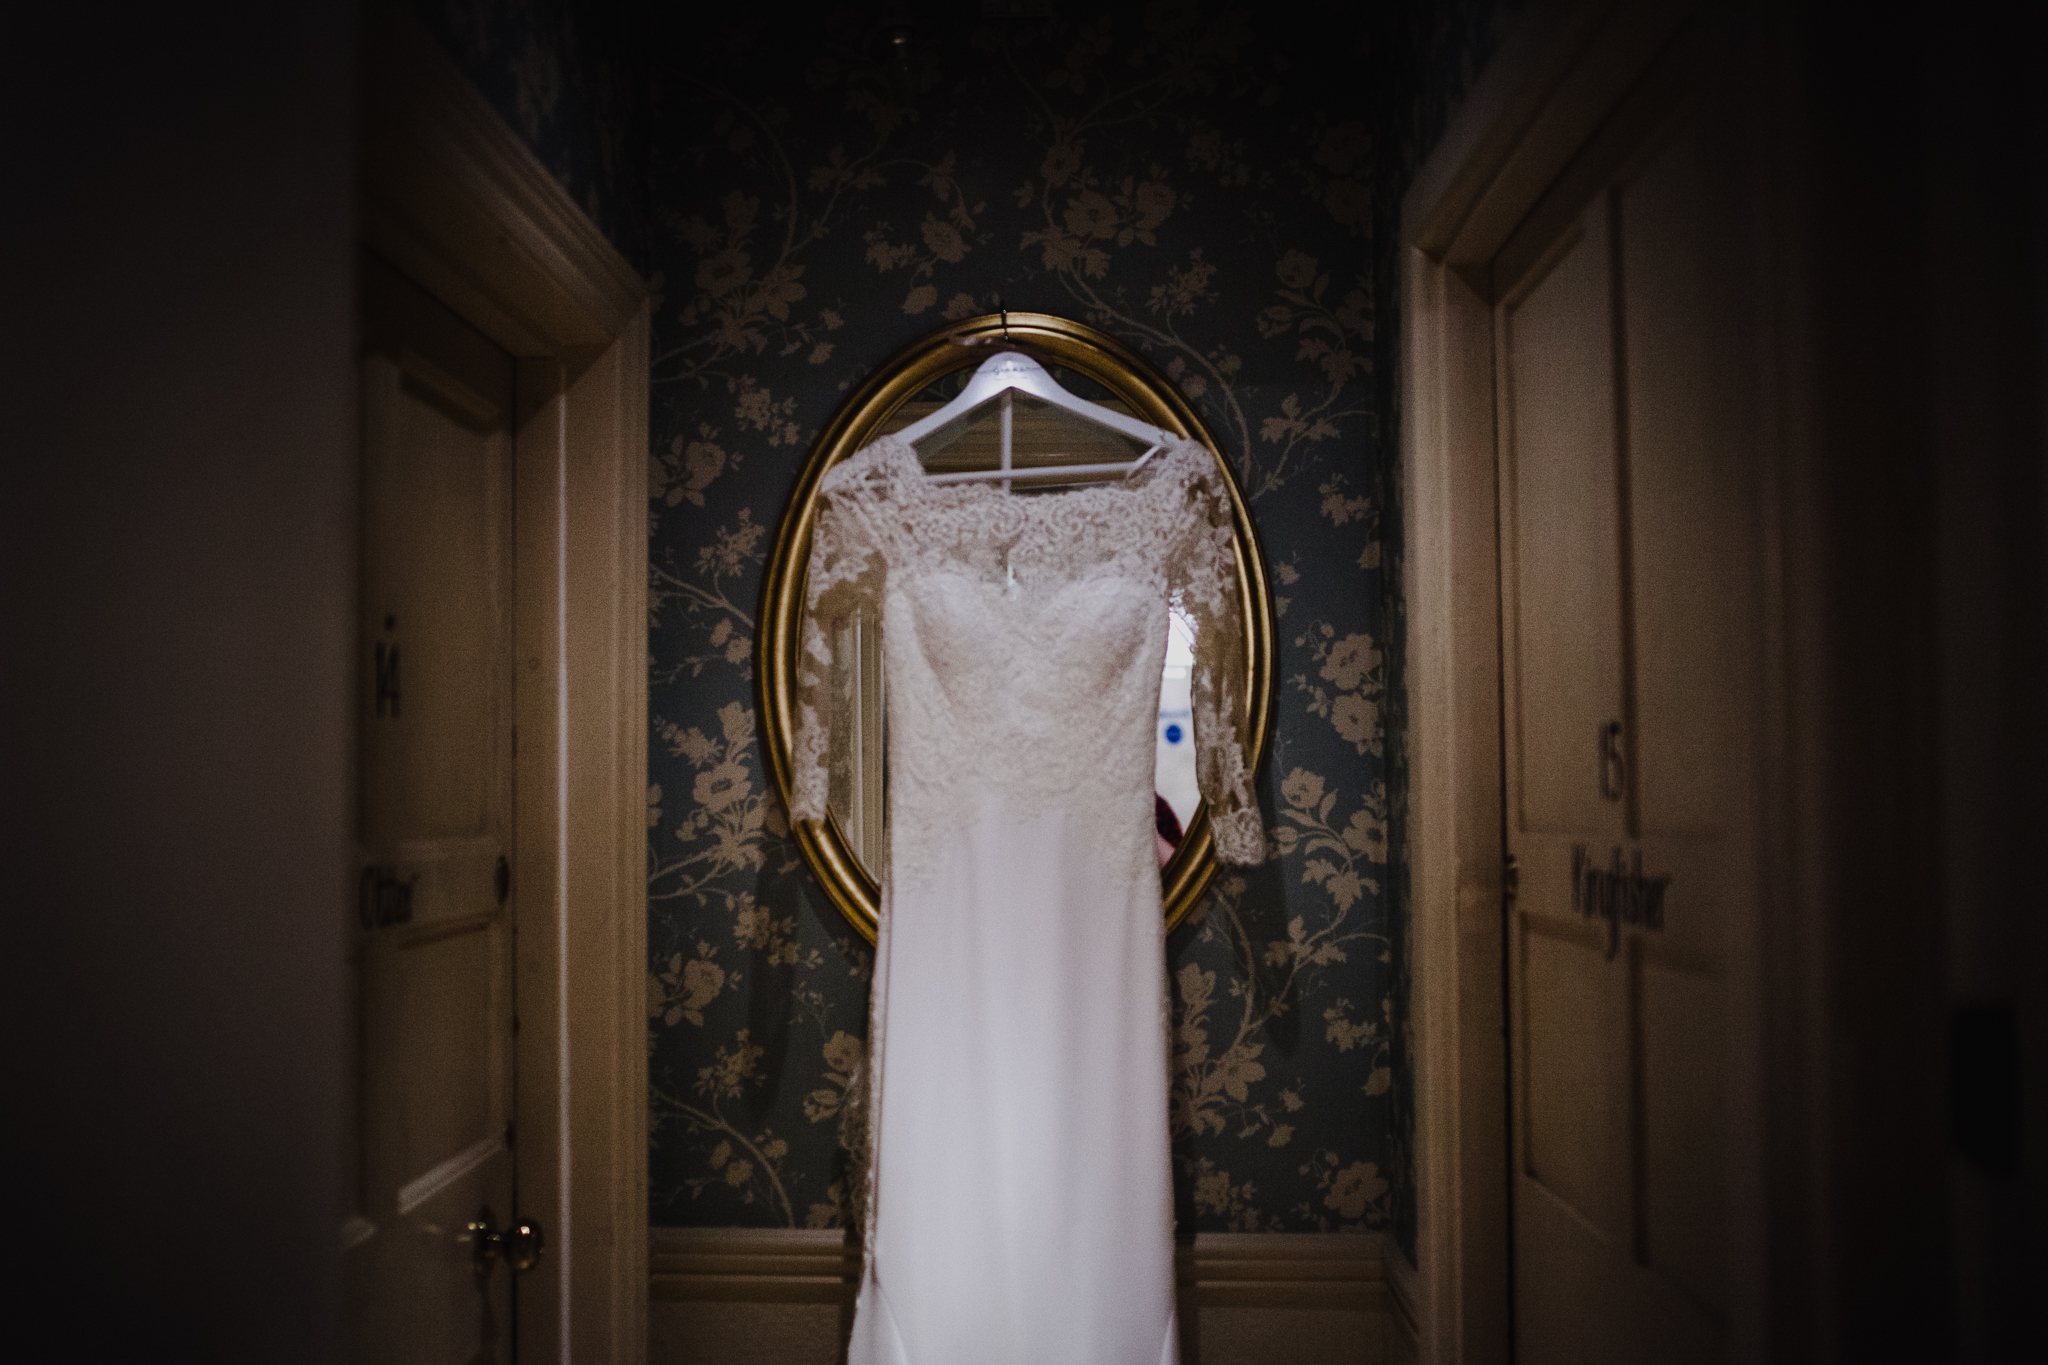 Wedding dress hanging on mirror with patterned wallpaper